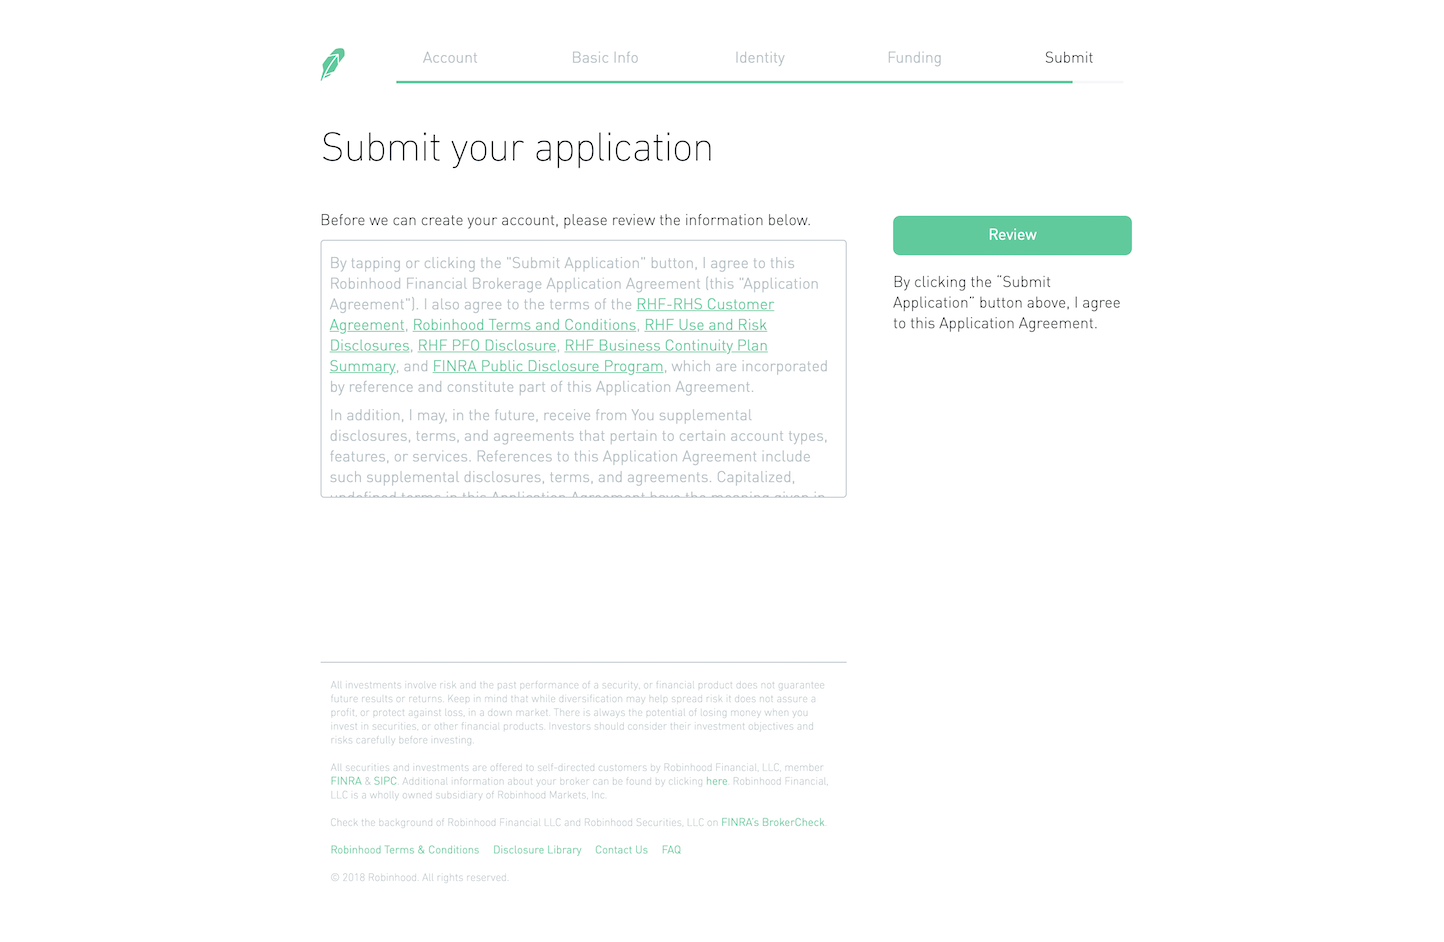 Screenshot of the Sign Up - Step 7 page from the Robinhood website.